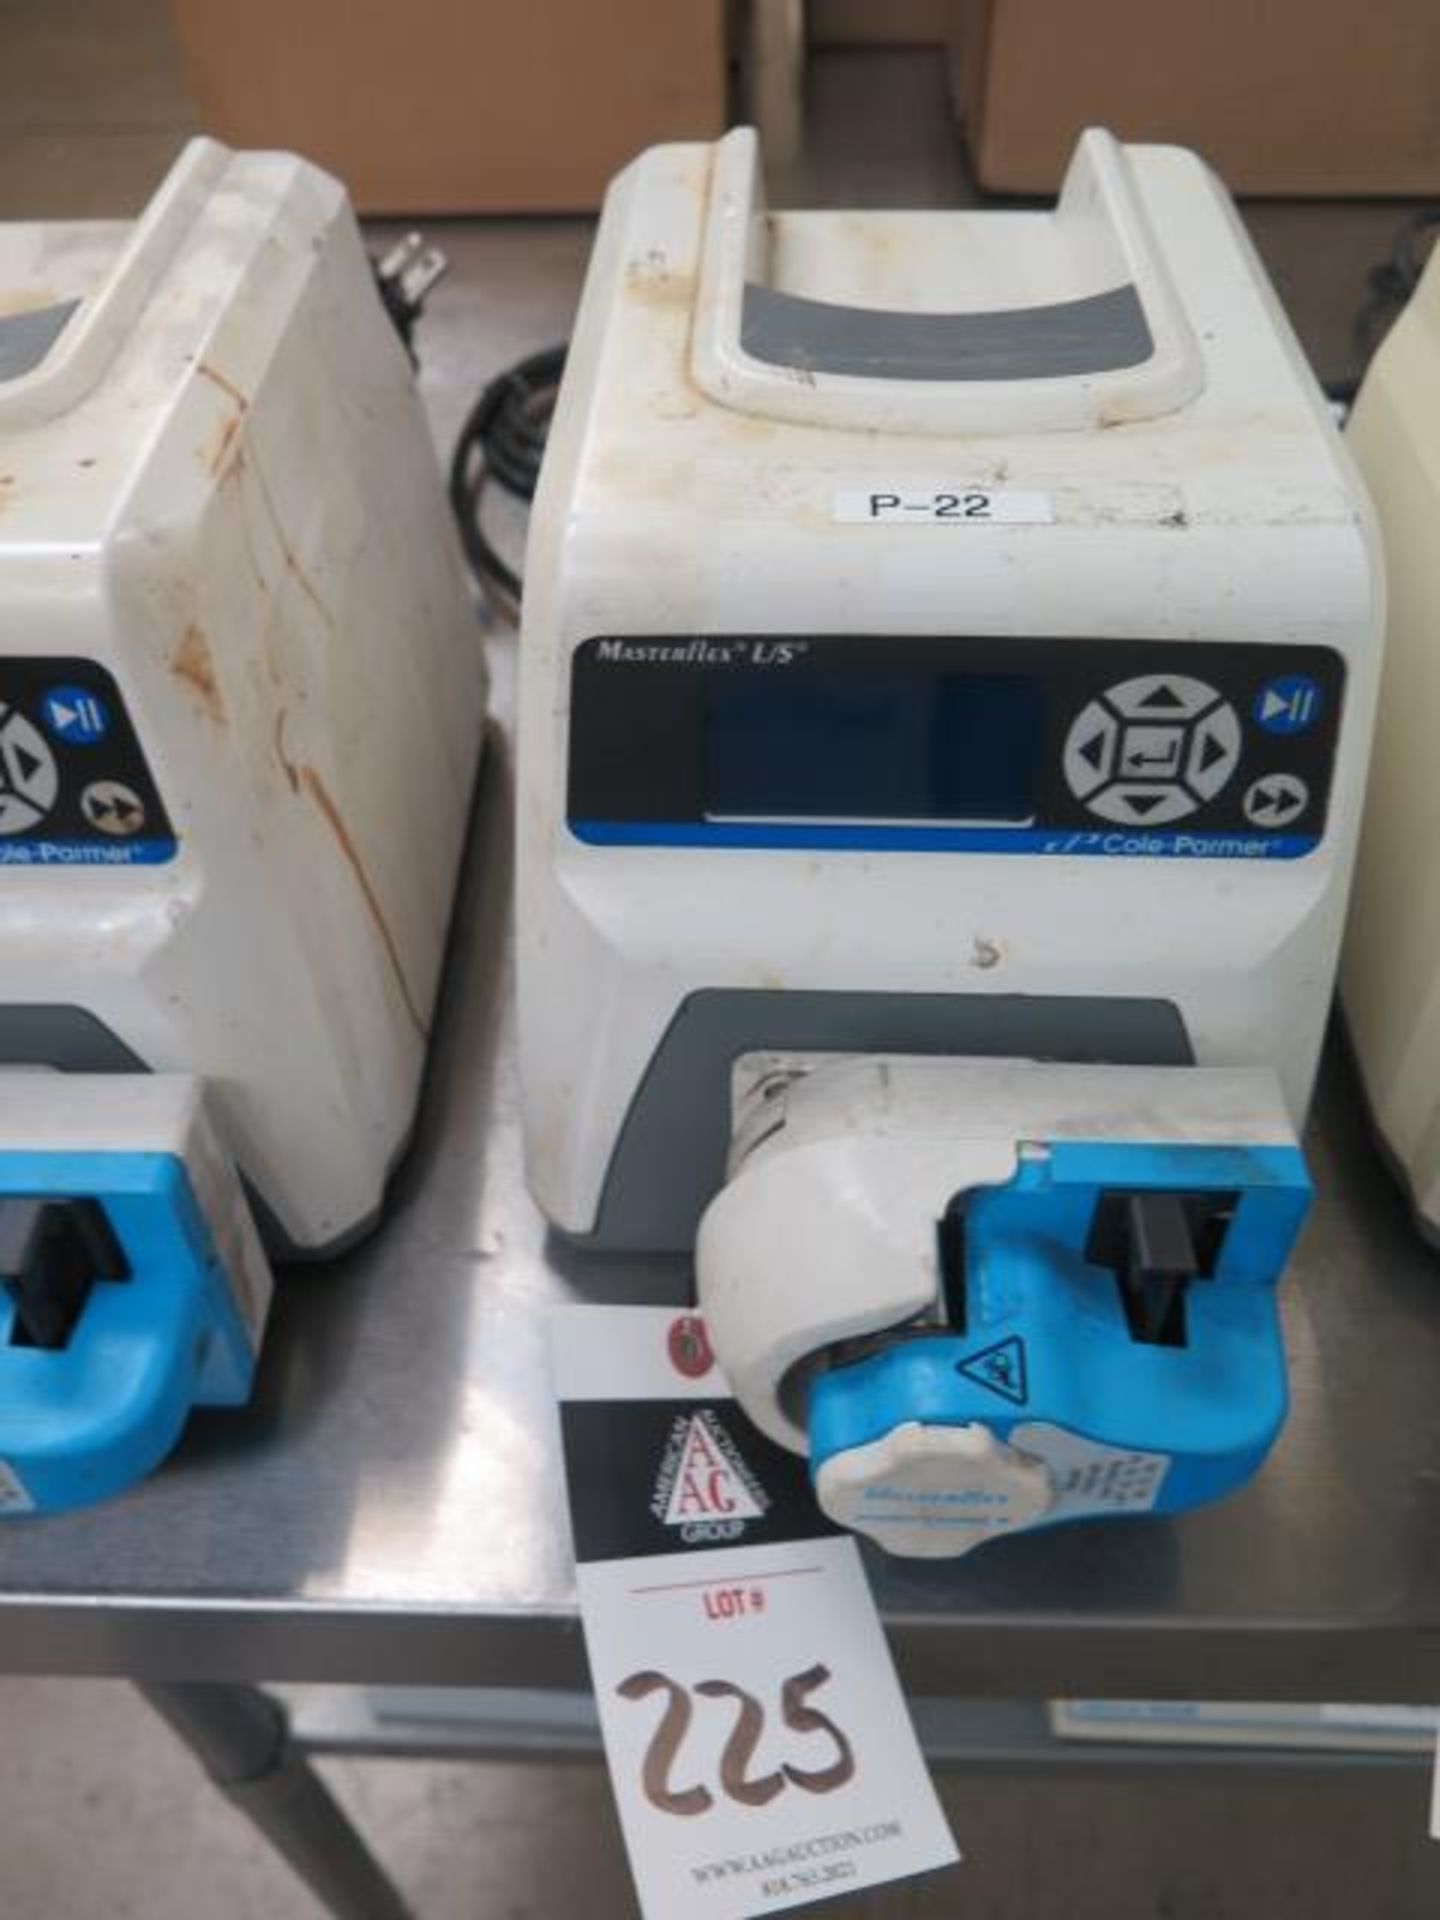 Cole-Parmer Masterflex L/S Peristaltic Pump, SOLD AS IS AND WITH NO WARRANTY